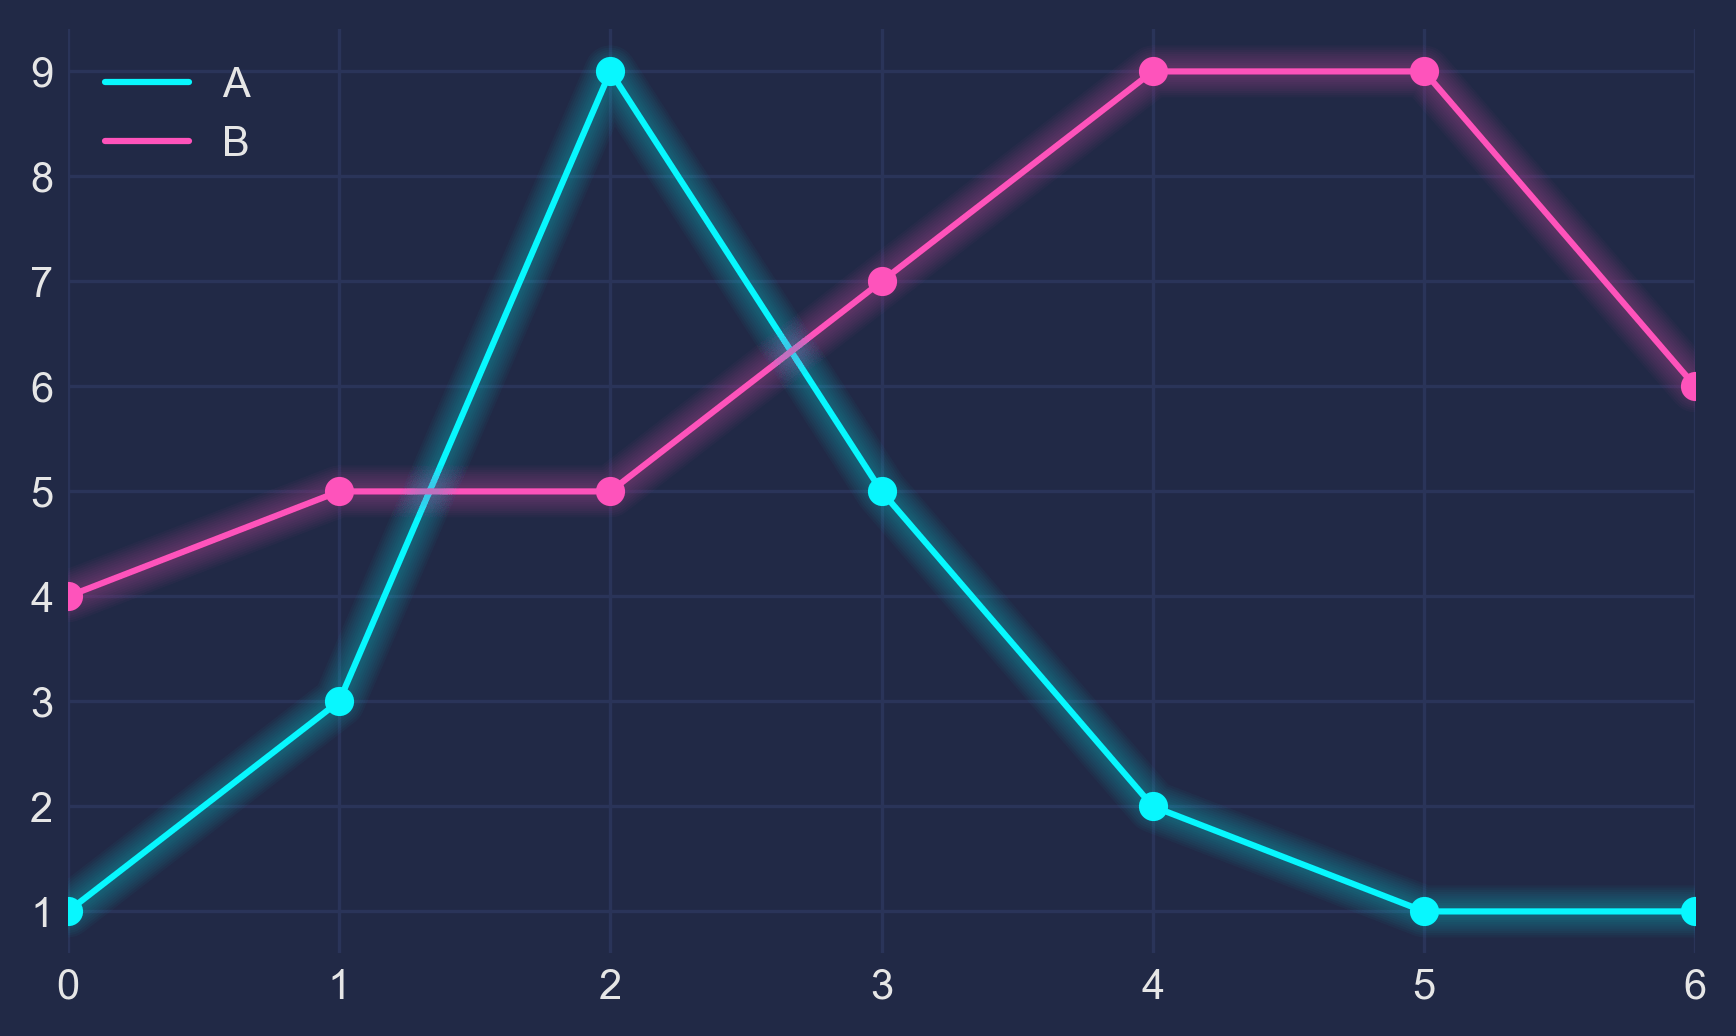 A simple chart with a dark background consisted of two lines: A is the blue line and B is the purple line.  However, they have a neon look and are both glowing.